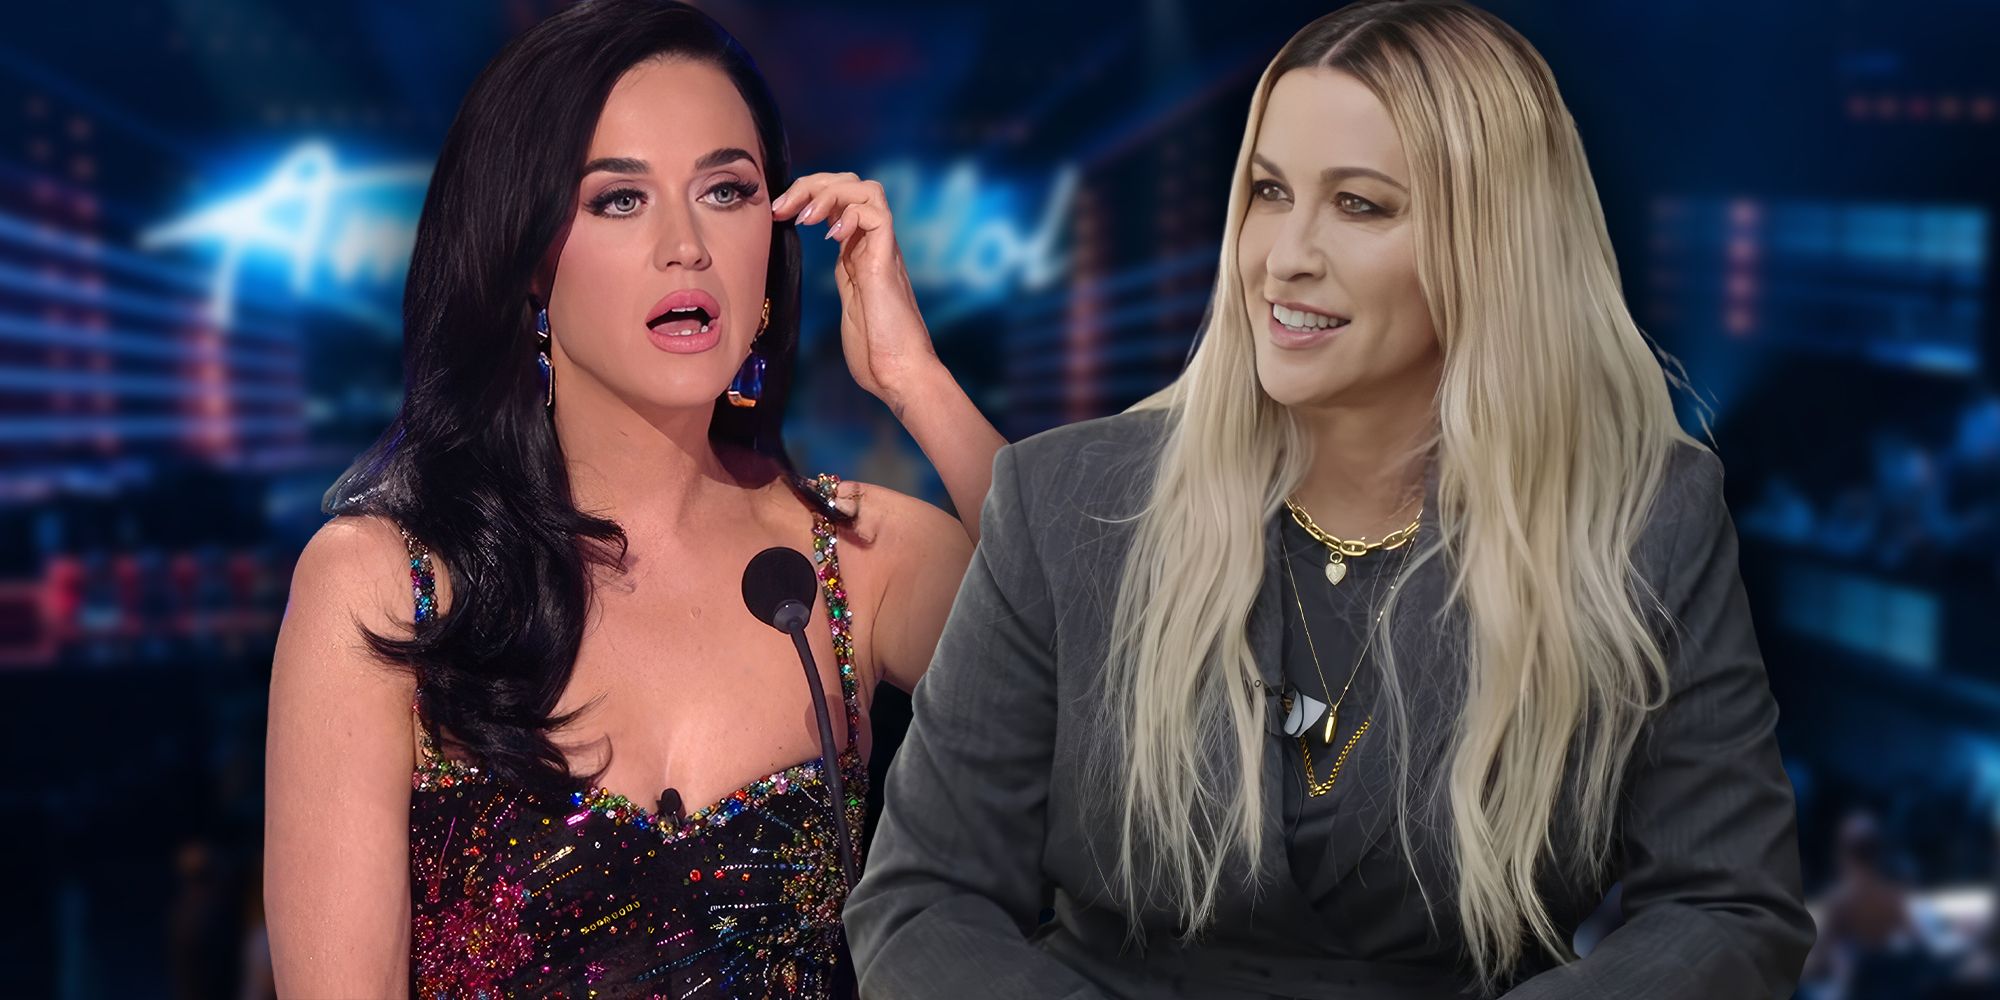 American Idol's Katy Perry looking shocked and guest judge Alanis Morissette smiling